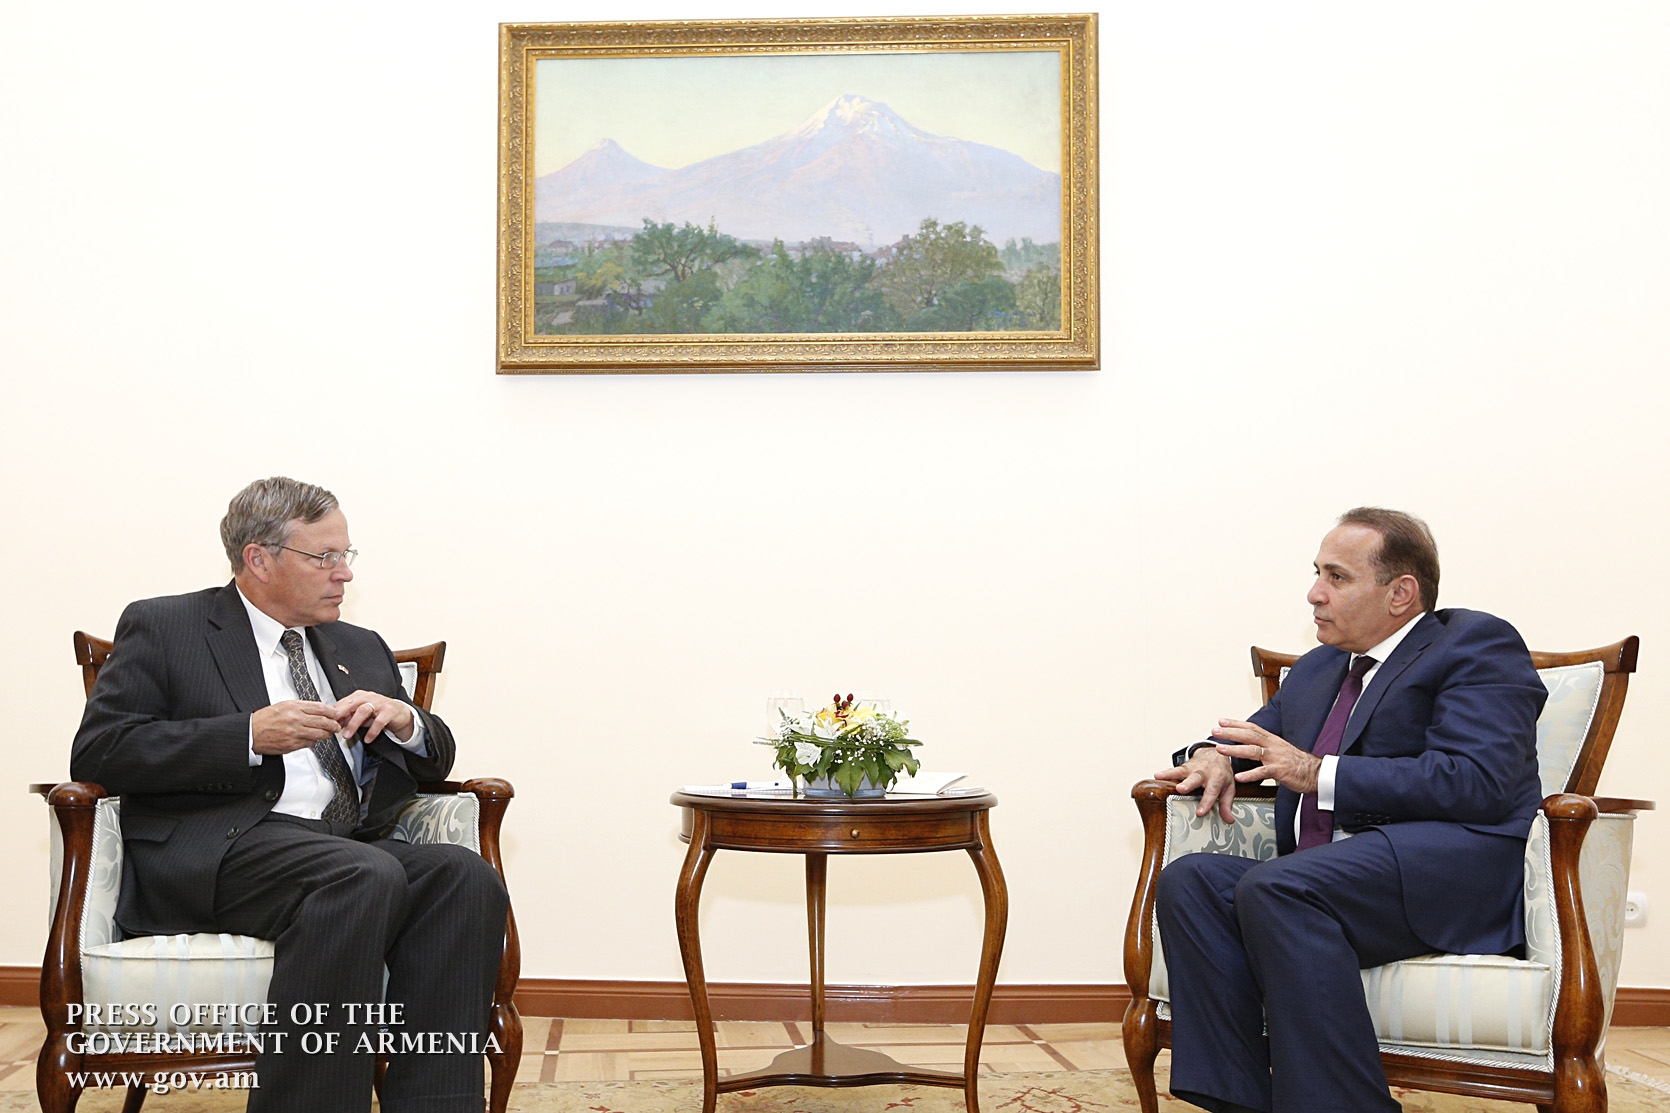 Prime Minister of Armenia highly appreciates support provided by U.S.